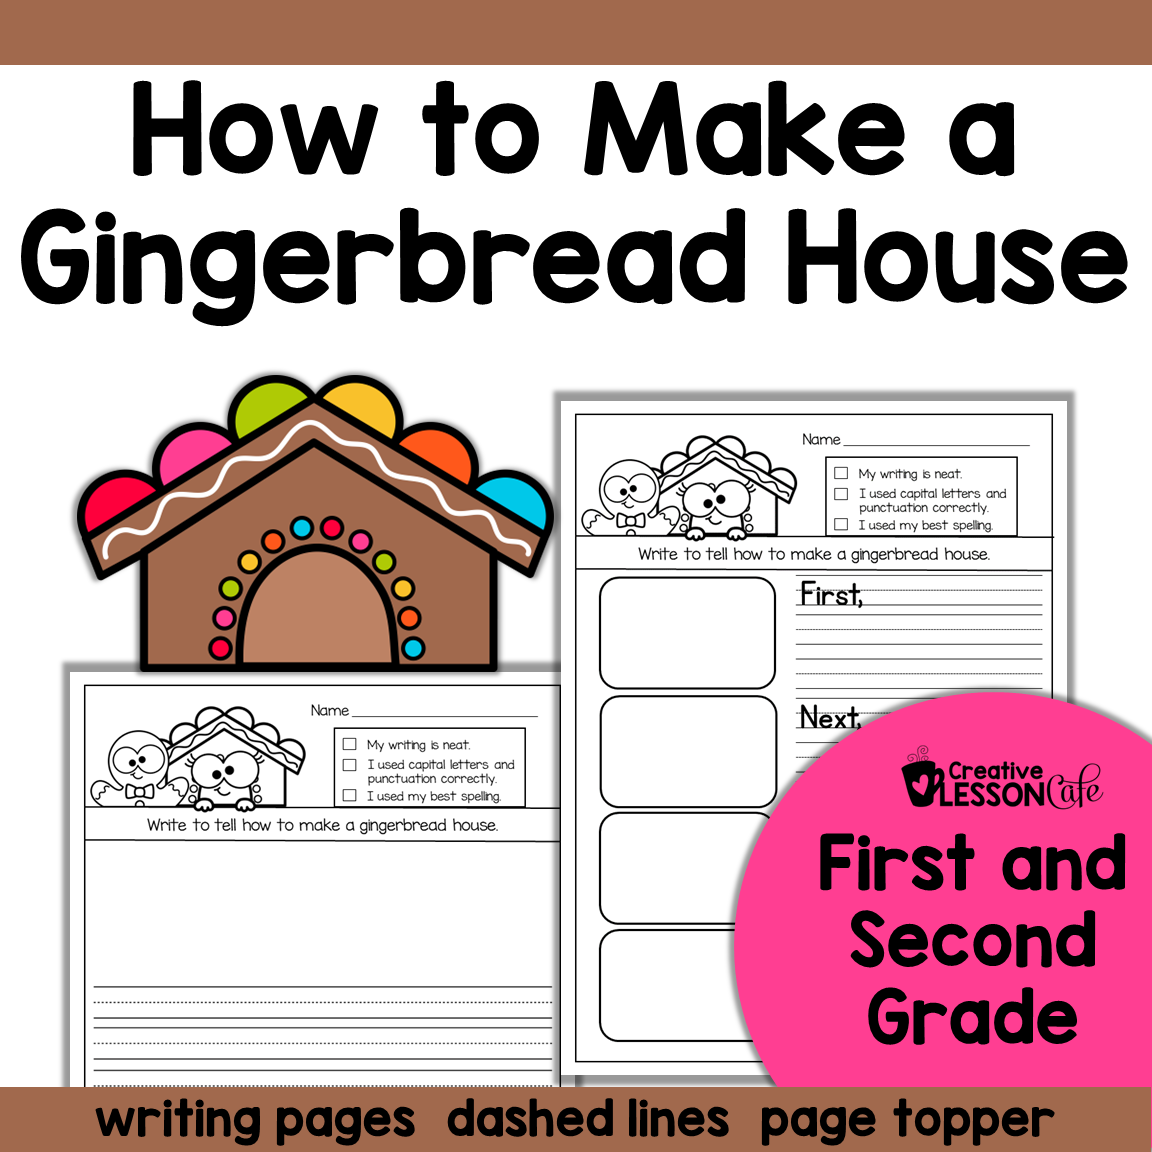 How to Make a Gingerbread House Printable Resource for Elementary Teachers